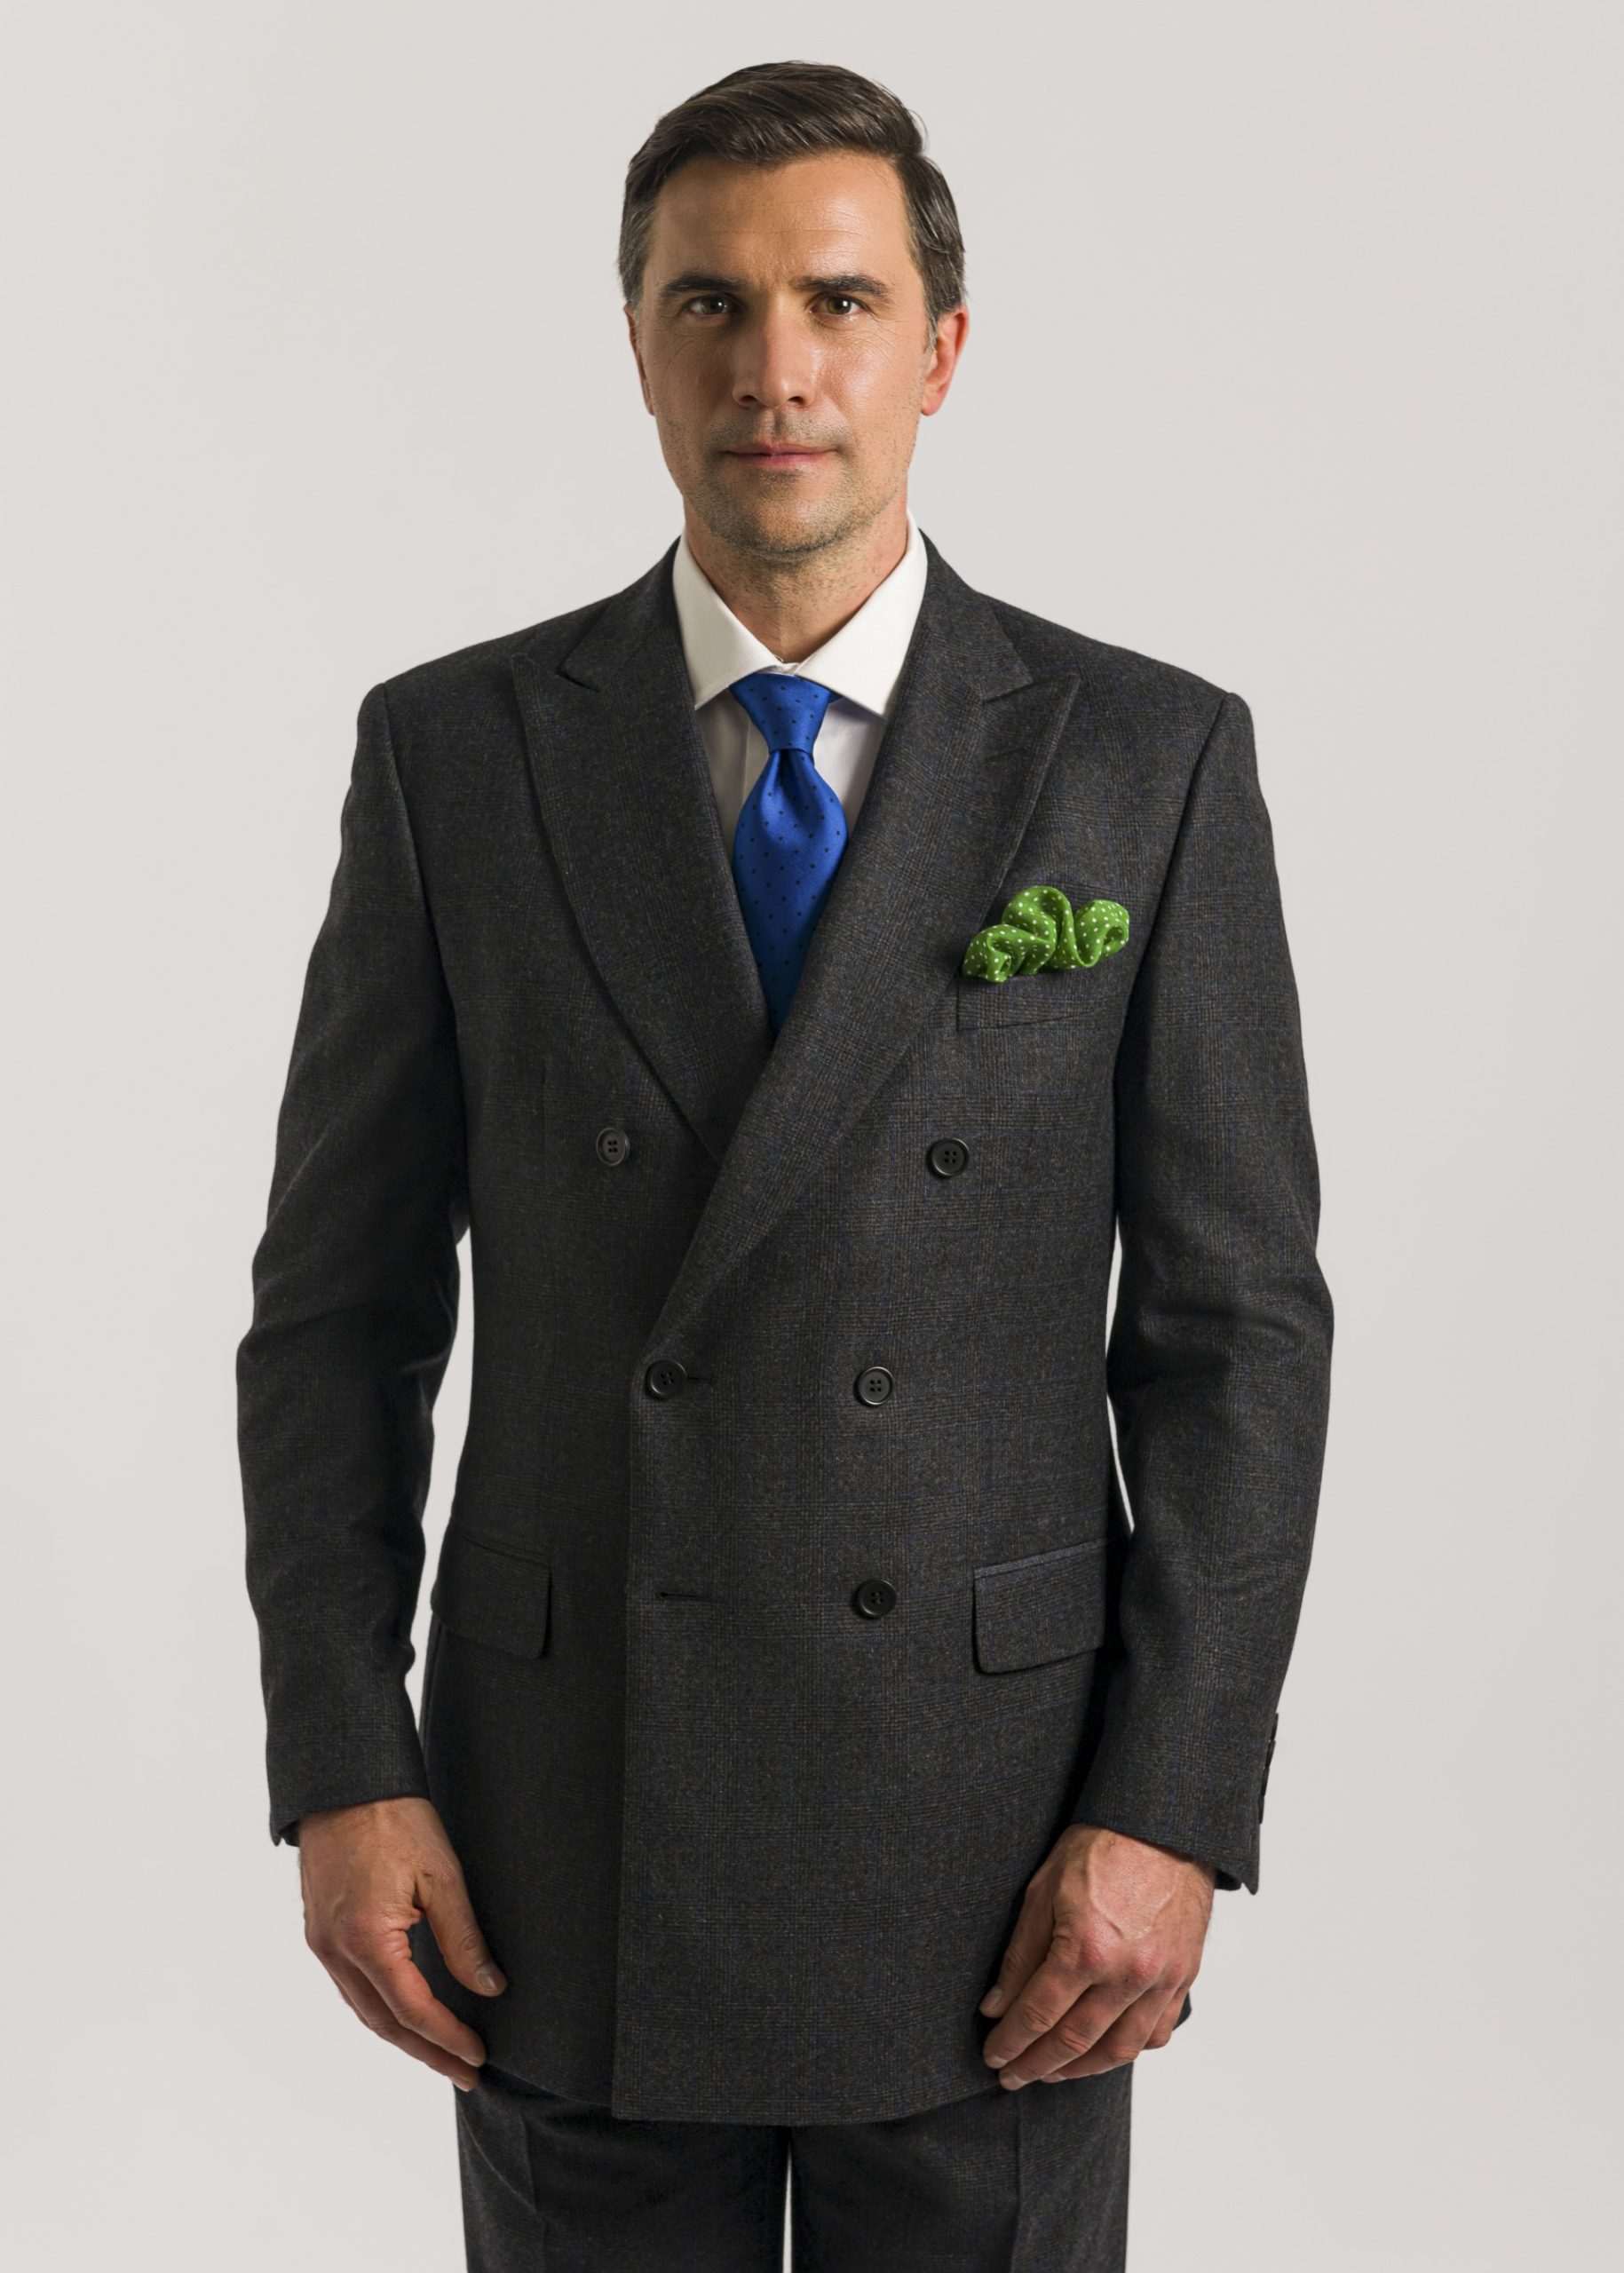 Men’s classic fit double breasted grey suit